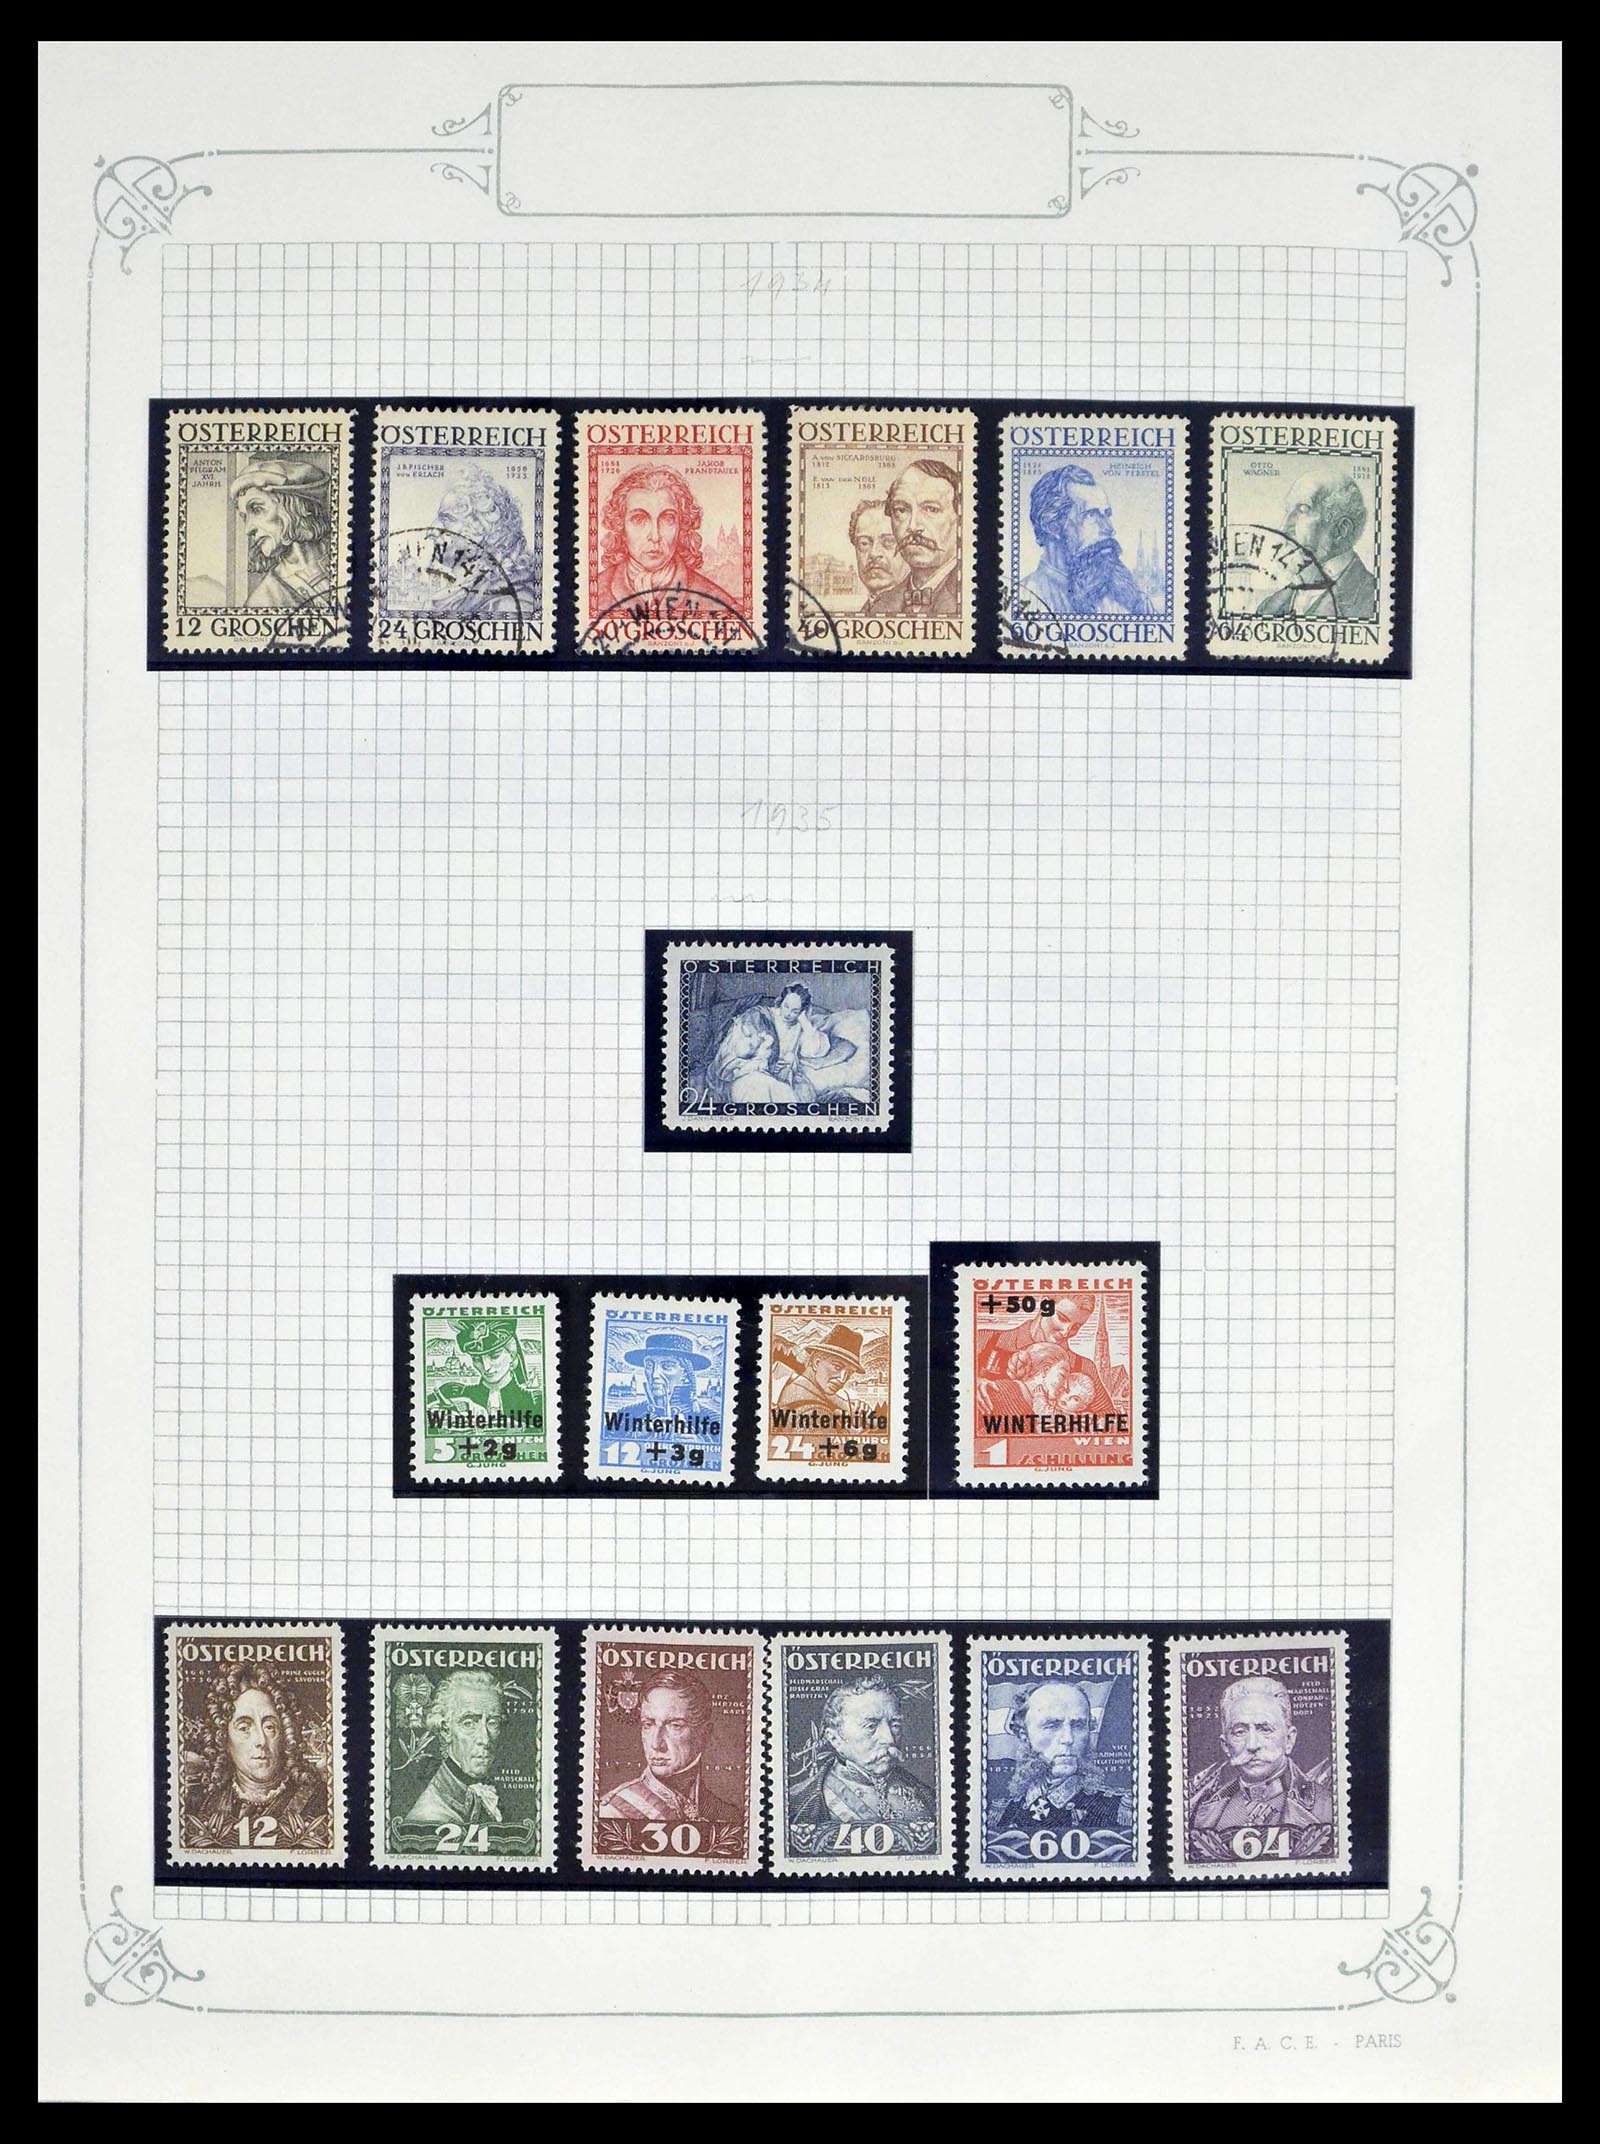 39276 0030 - Stamp collection 39276 Austria and territories 1850-1979.